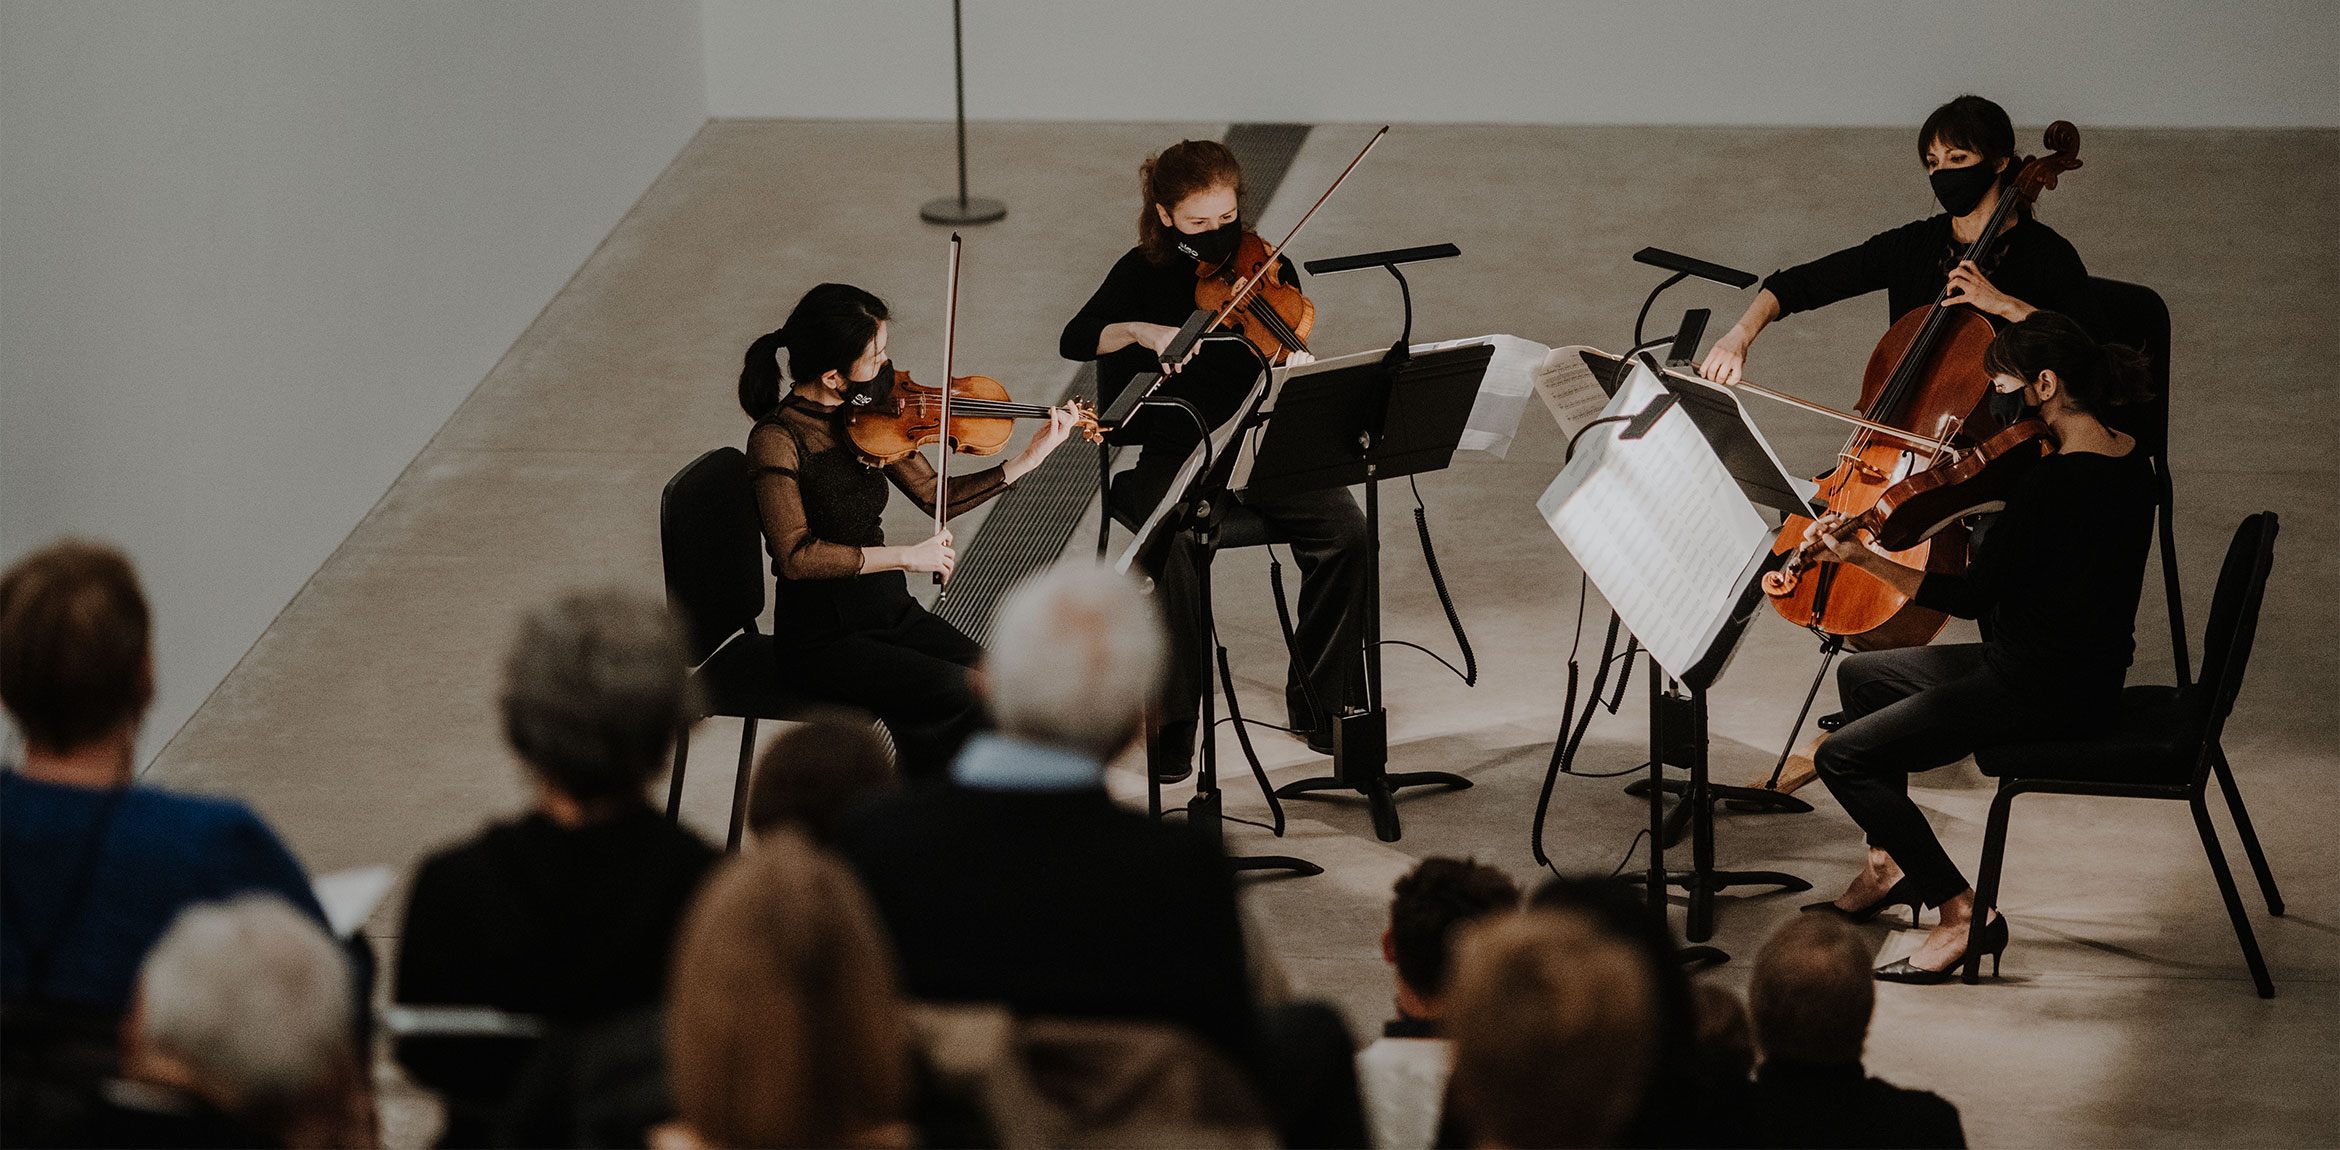 Four string musicians performing before an audience